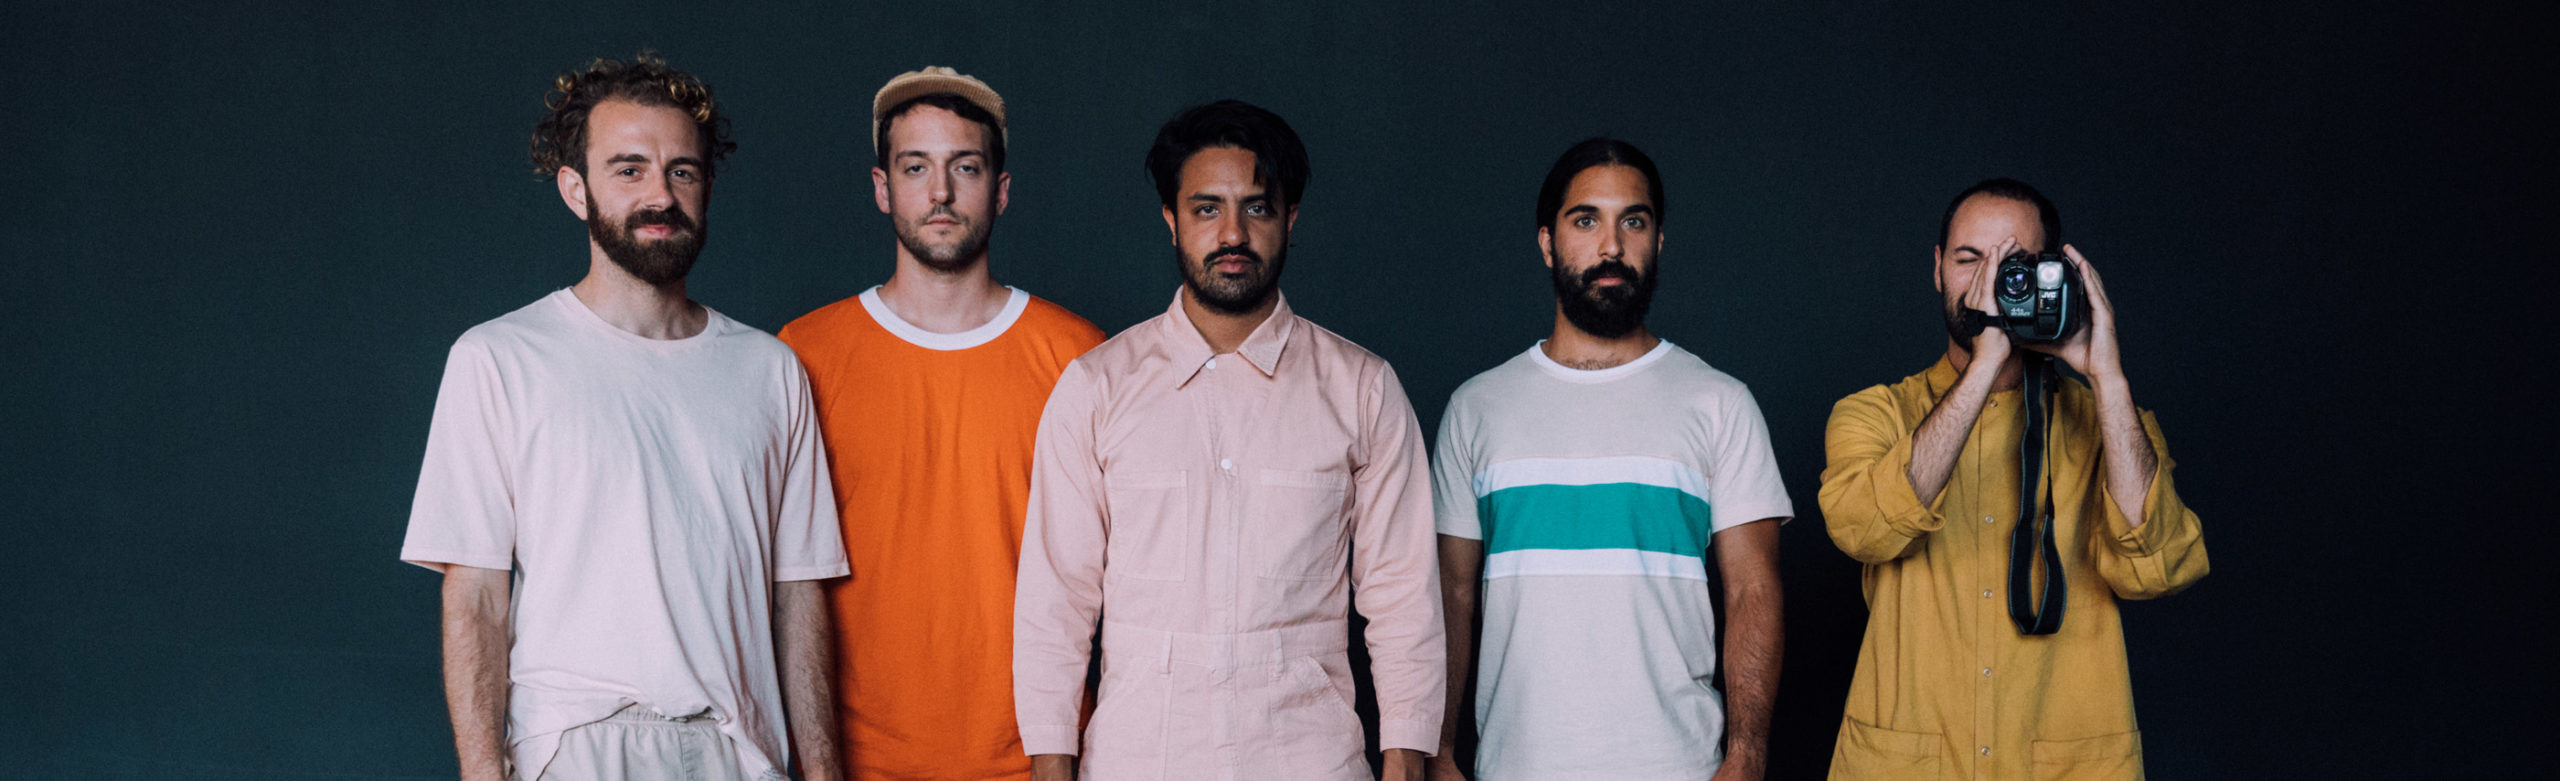 Young The Giant Ticket  + Vinyl Giveaway Image